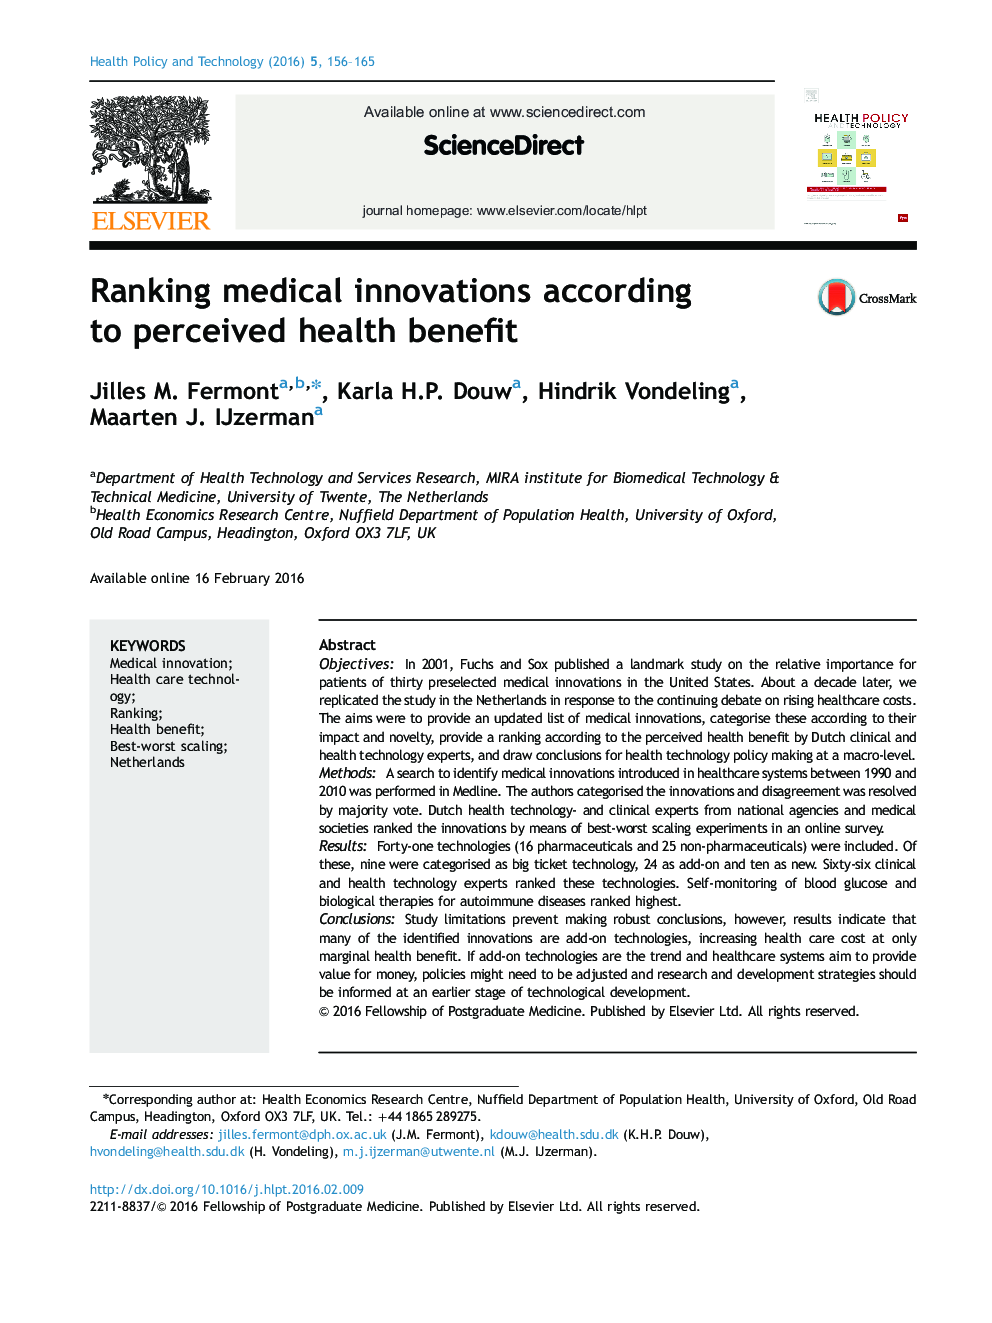 Ranking medical innovations according to perceived health benefit